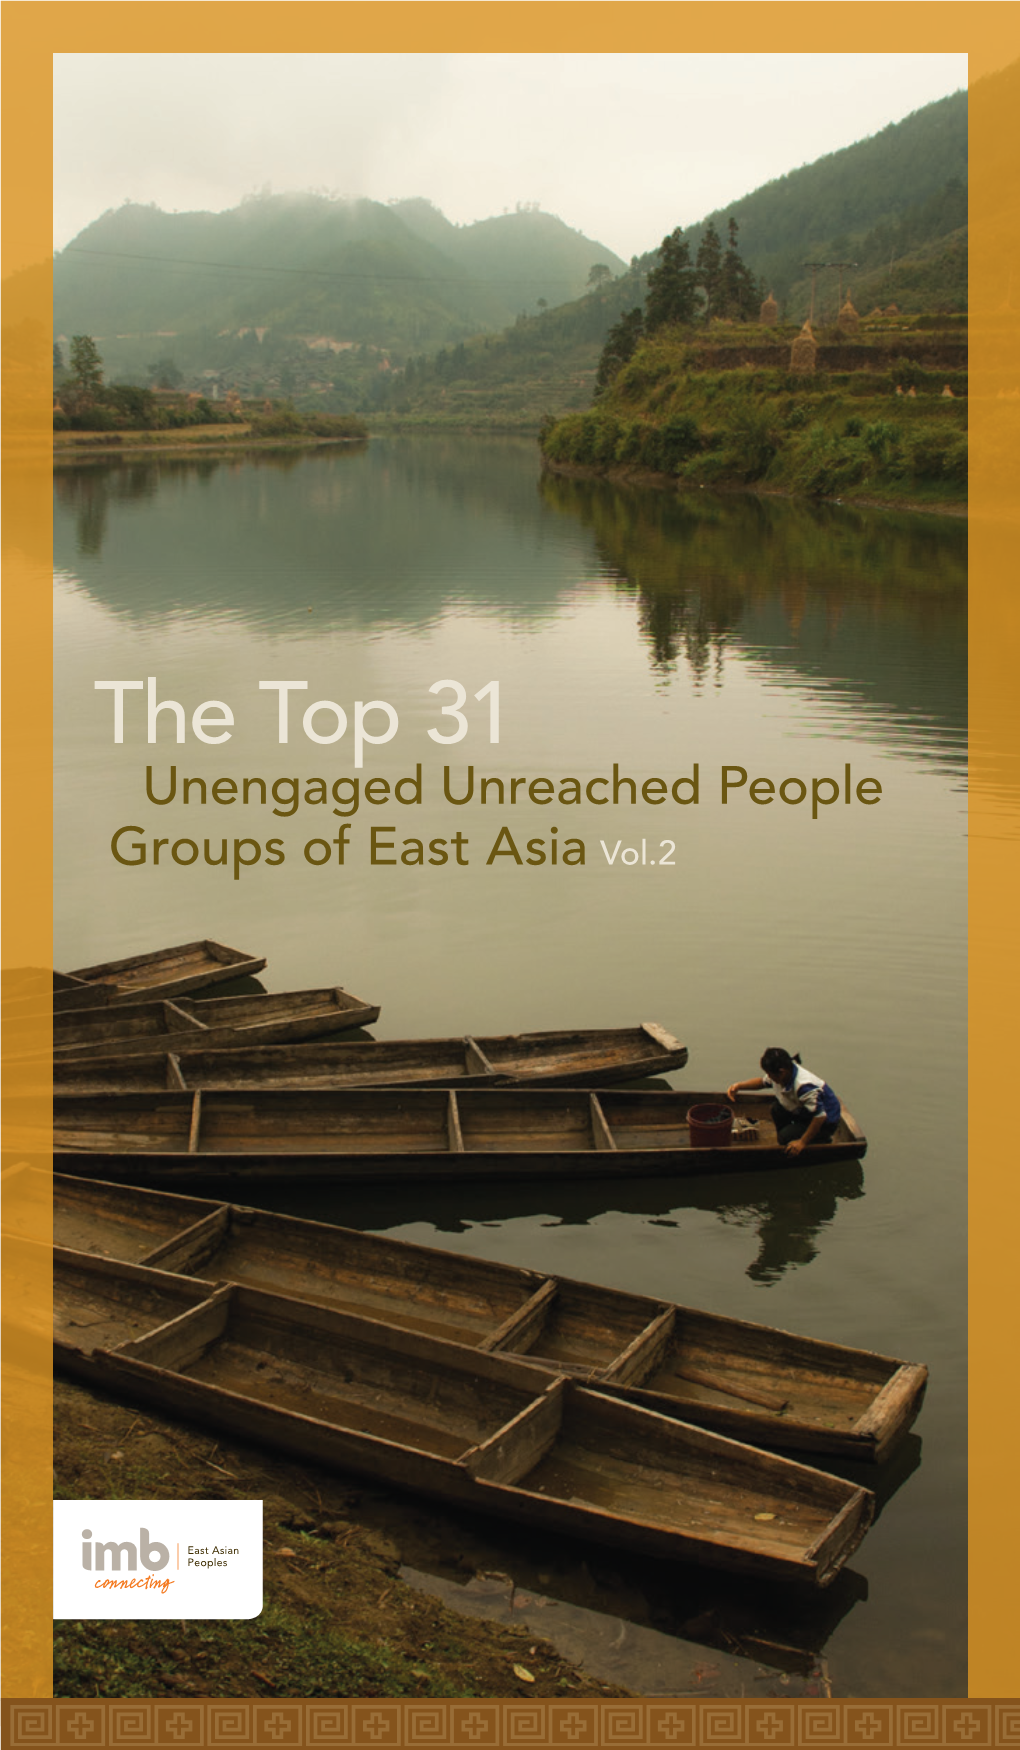 The Top 31 Unengaged Unreached People Groups of East Asia Vol.2